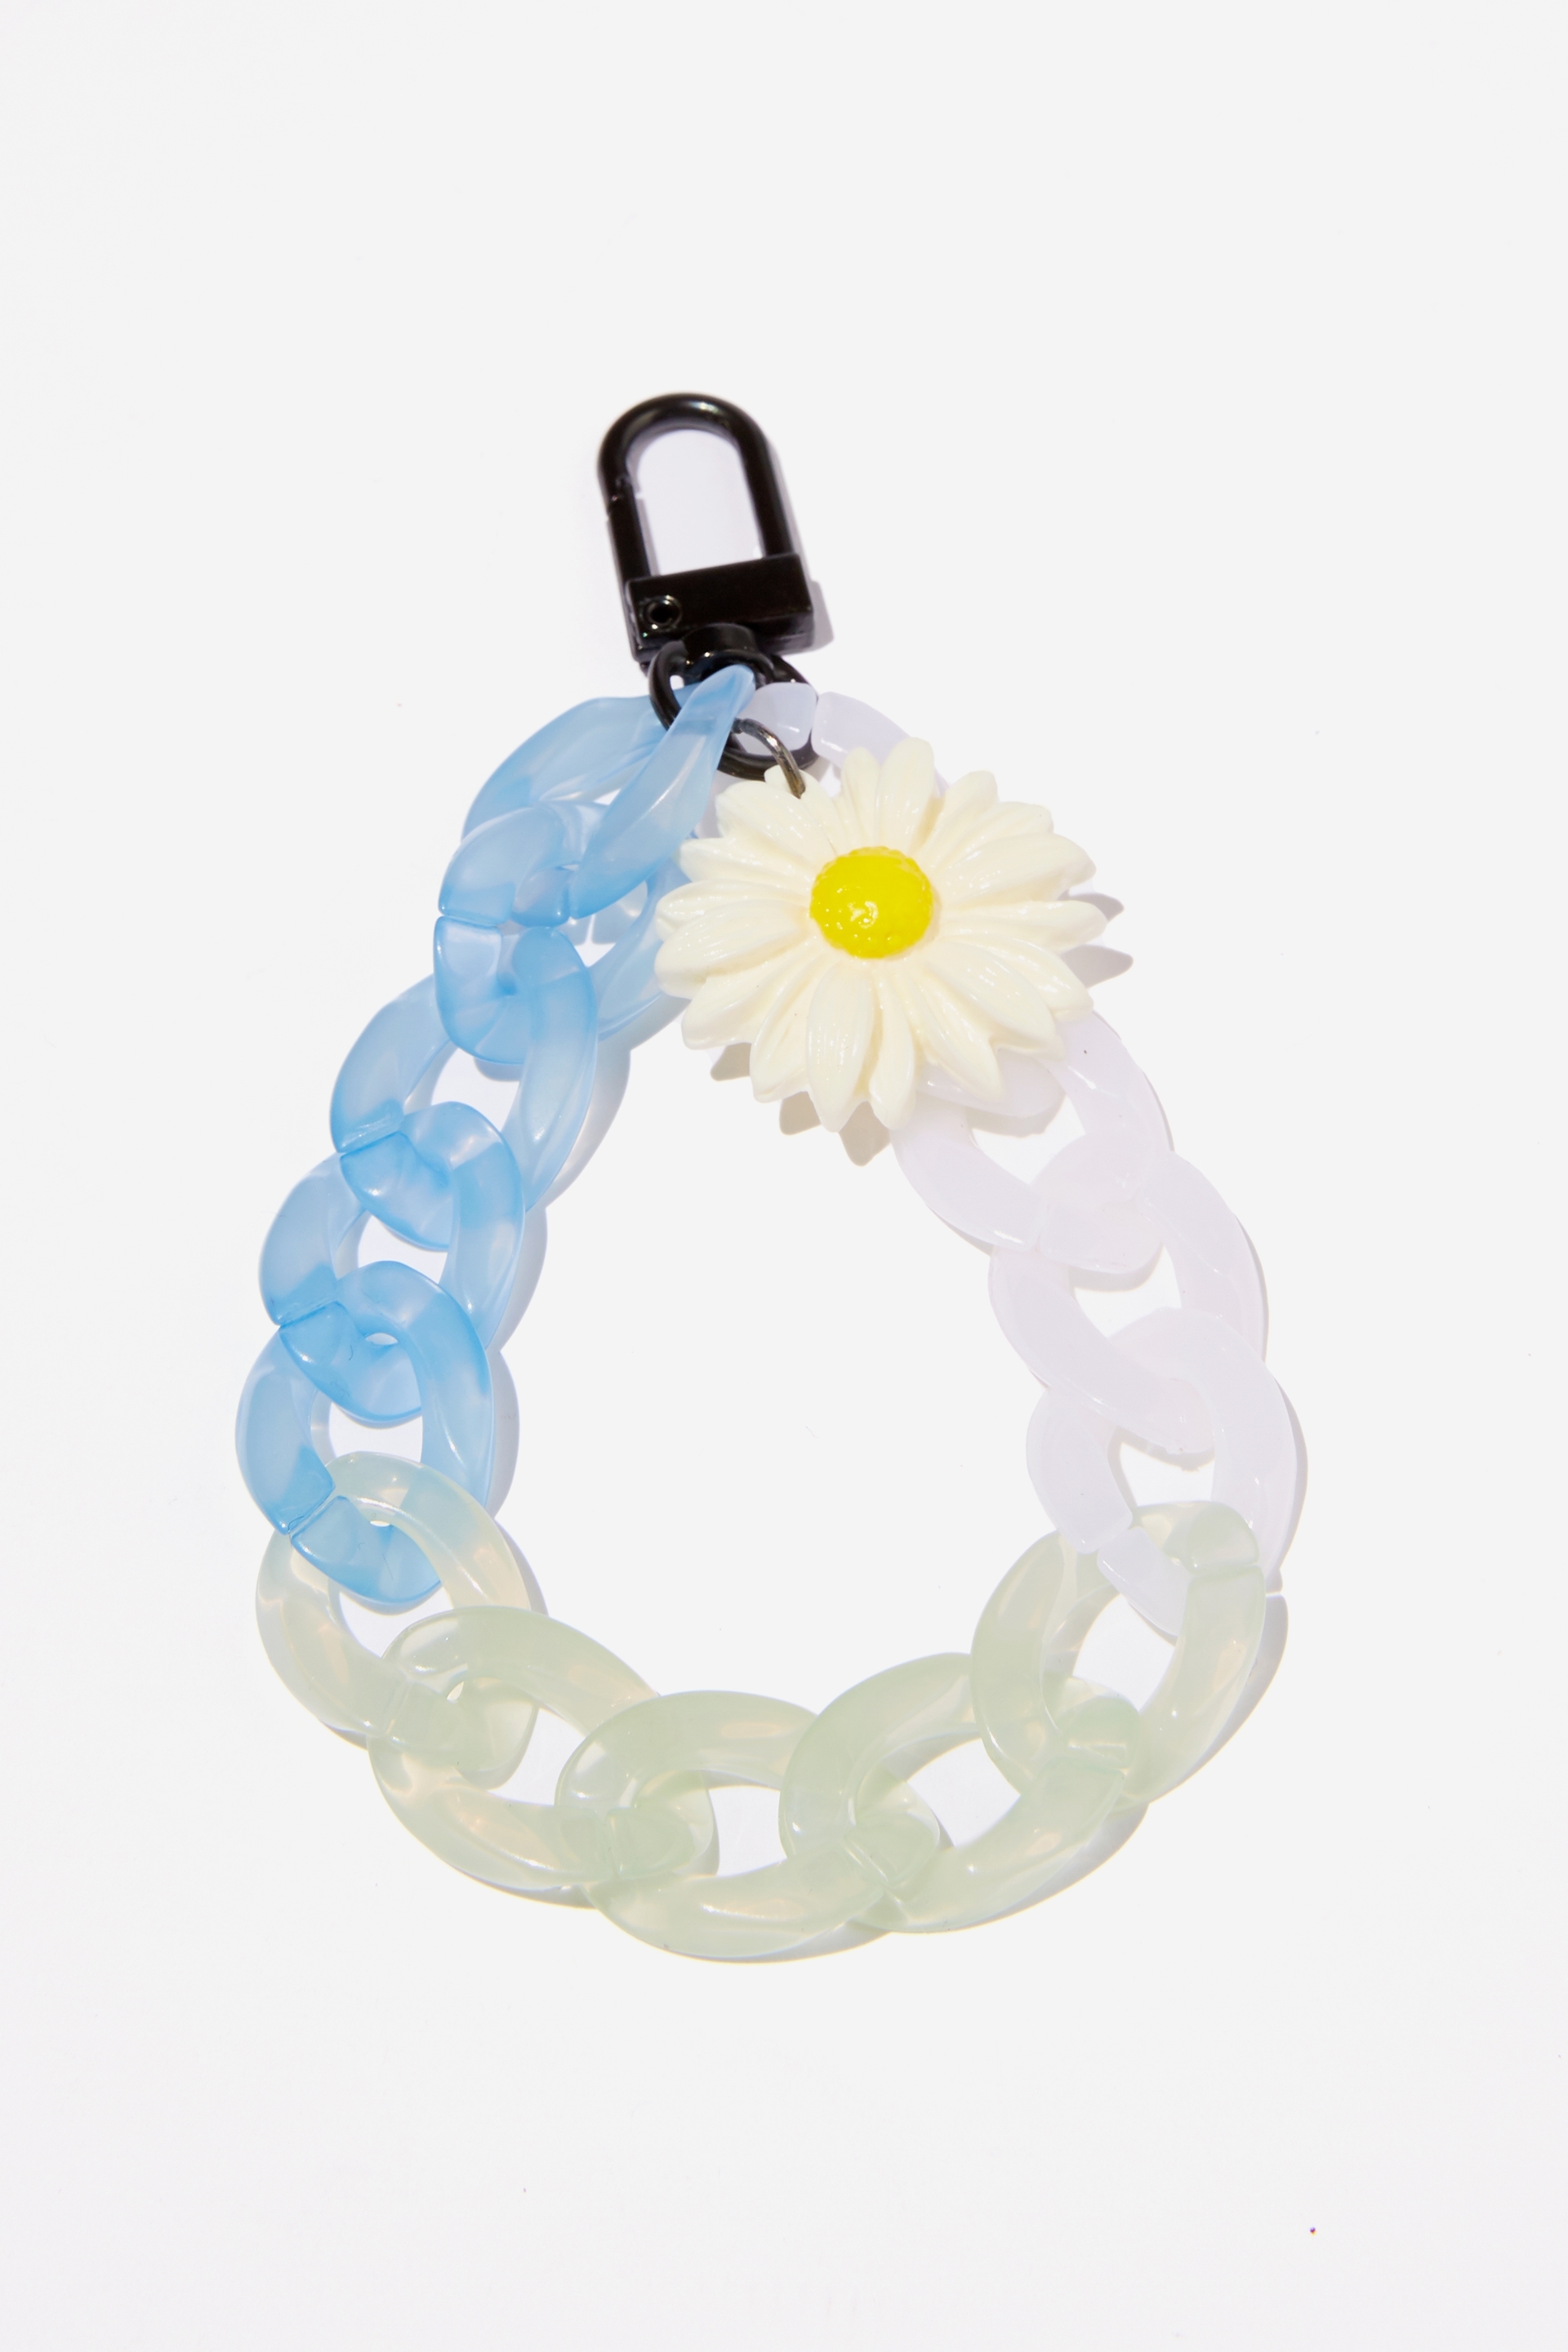 Typo - Trinket Bag Charm - Ombre blue chain & daisies